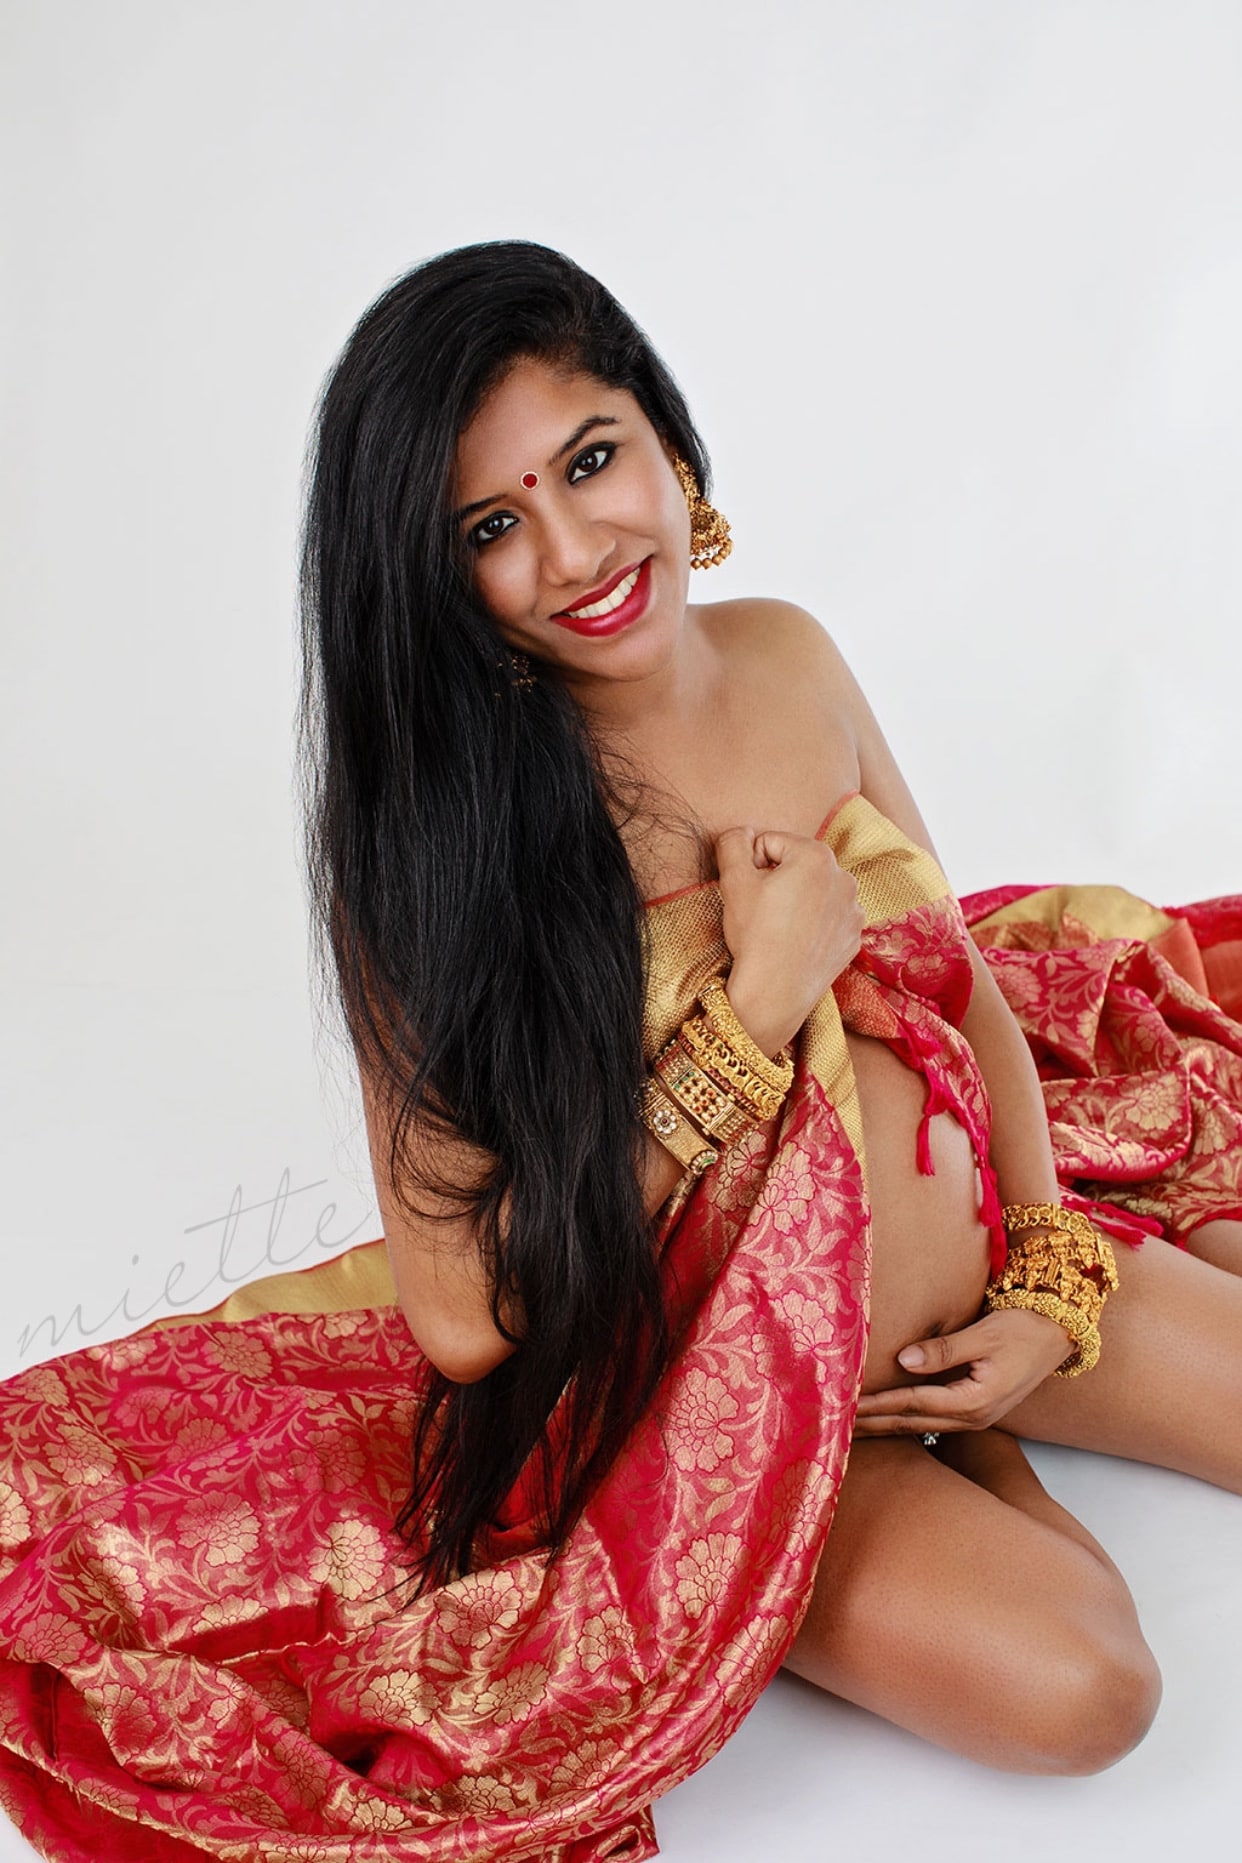 striking cultural maternity session with gorgeous woman in a sari